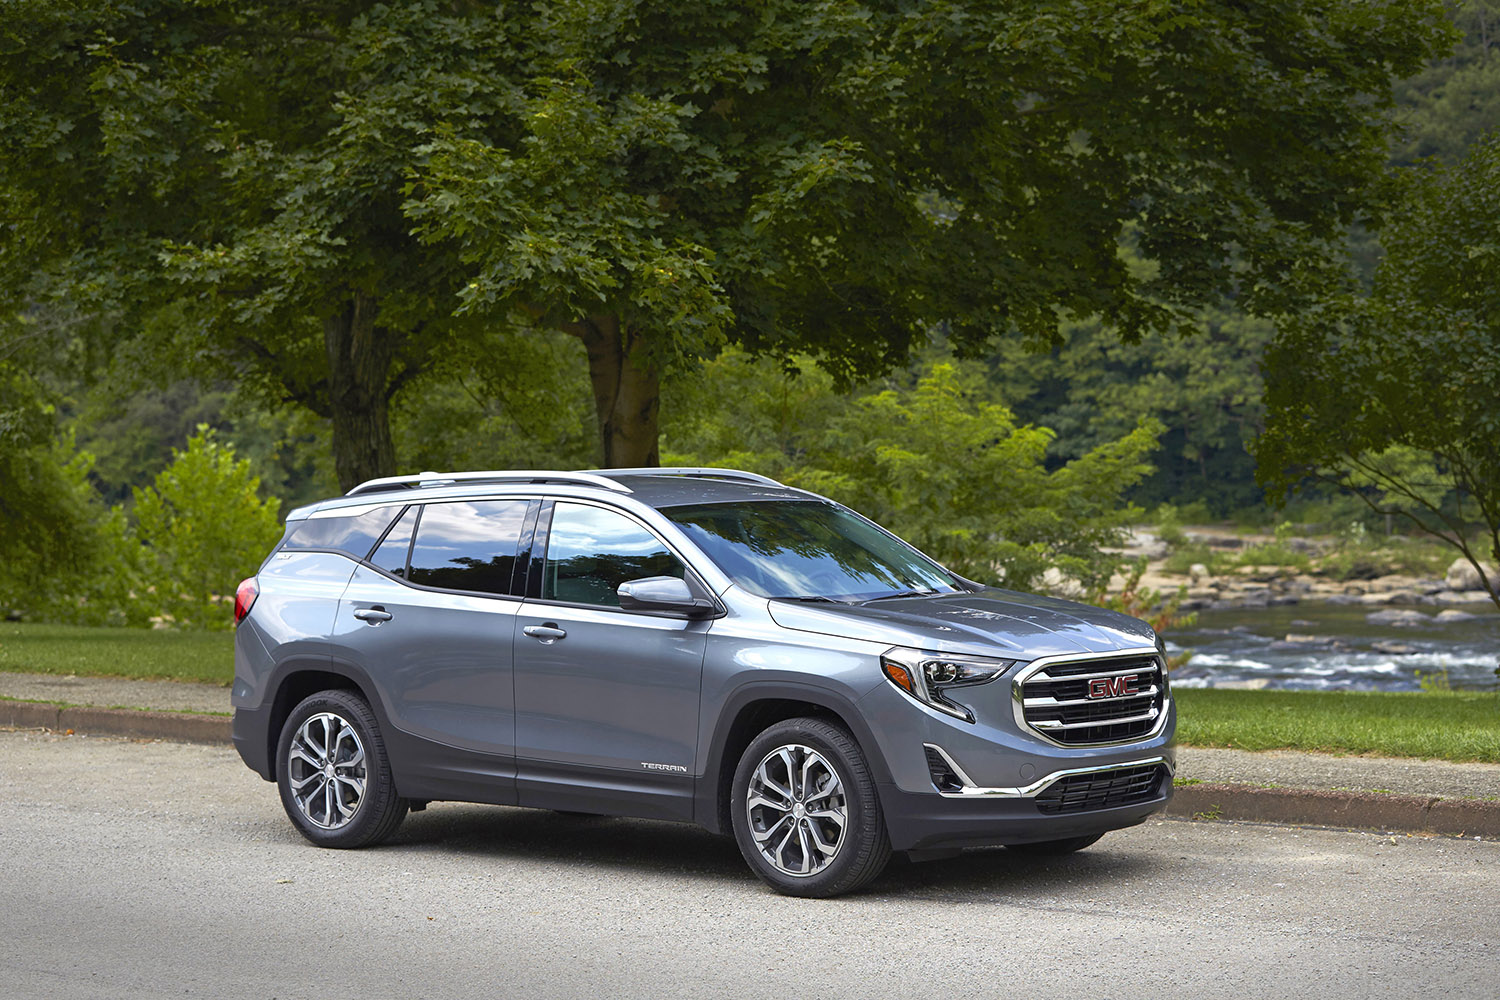 2018 GMC Terrain: One of Capital One's 10 Best Road Trip Vehicles, According to Science